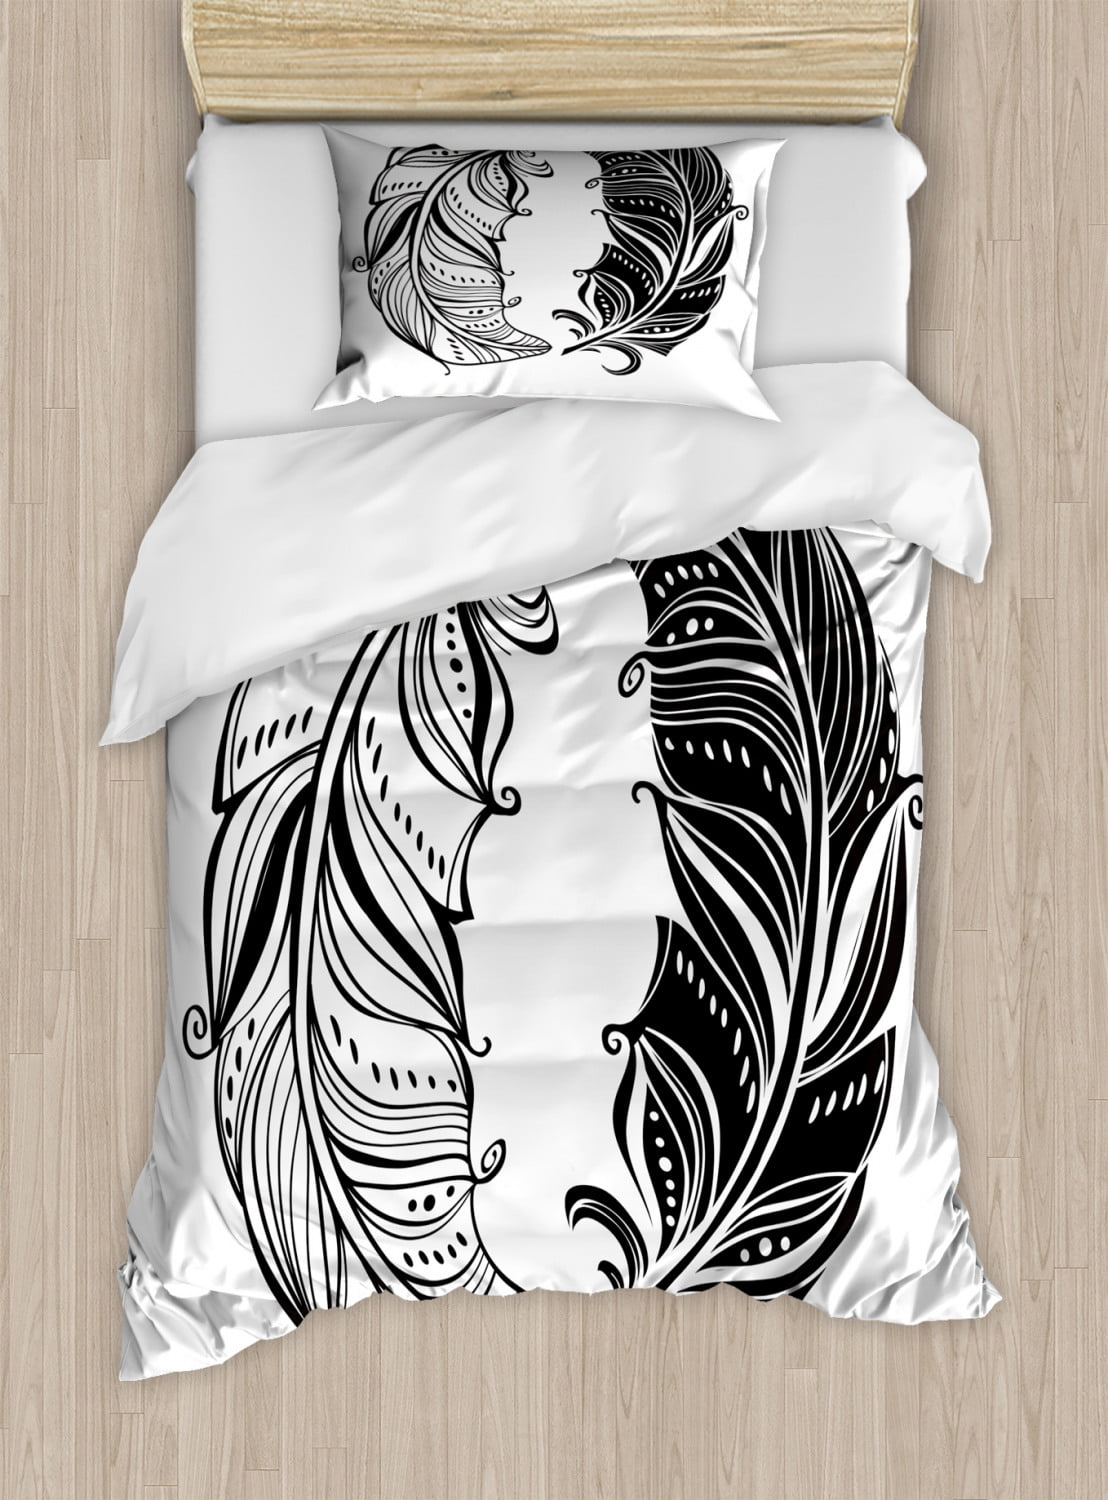 Black And White Duvet Cover Set Twin Size Boho Style Abstract Yin